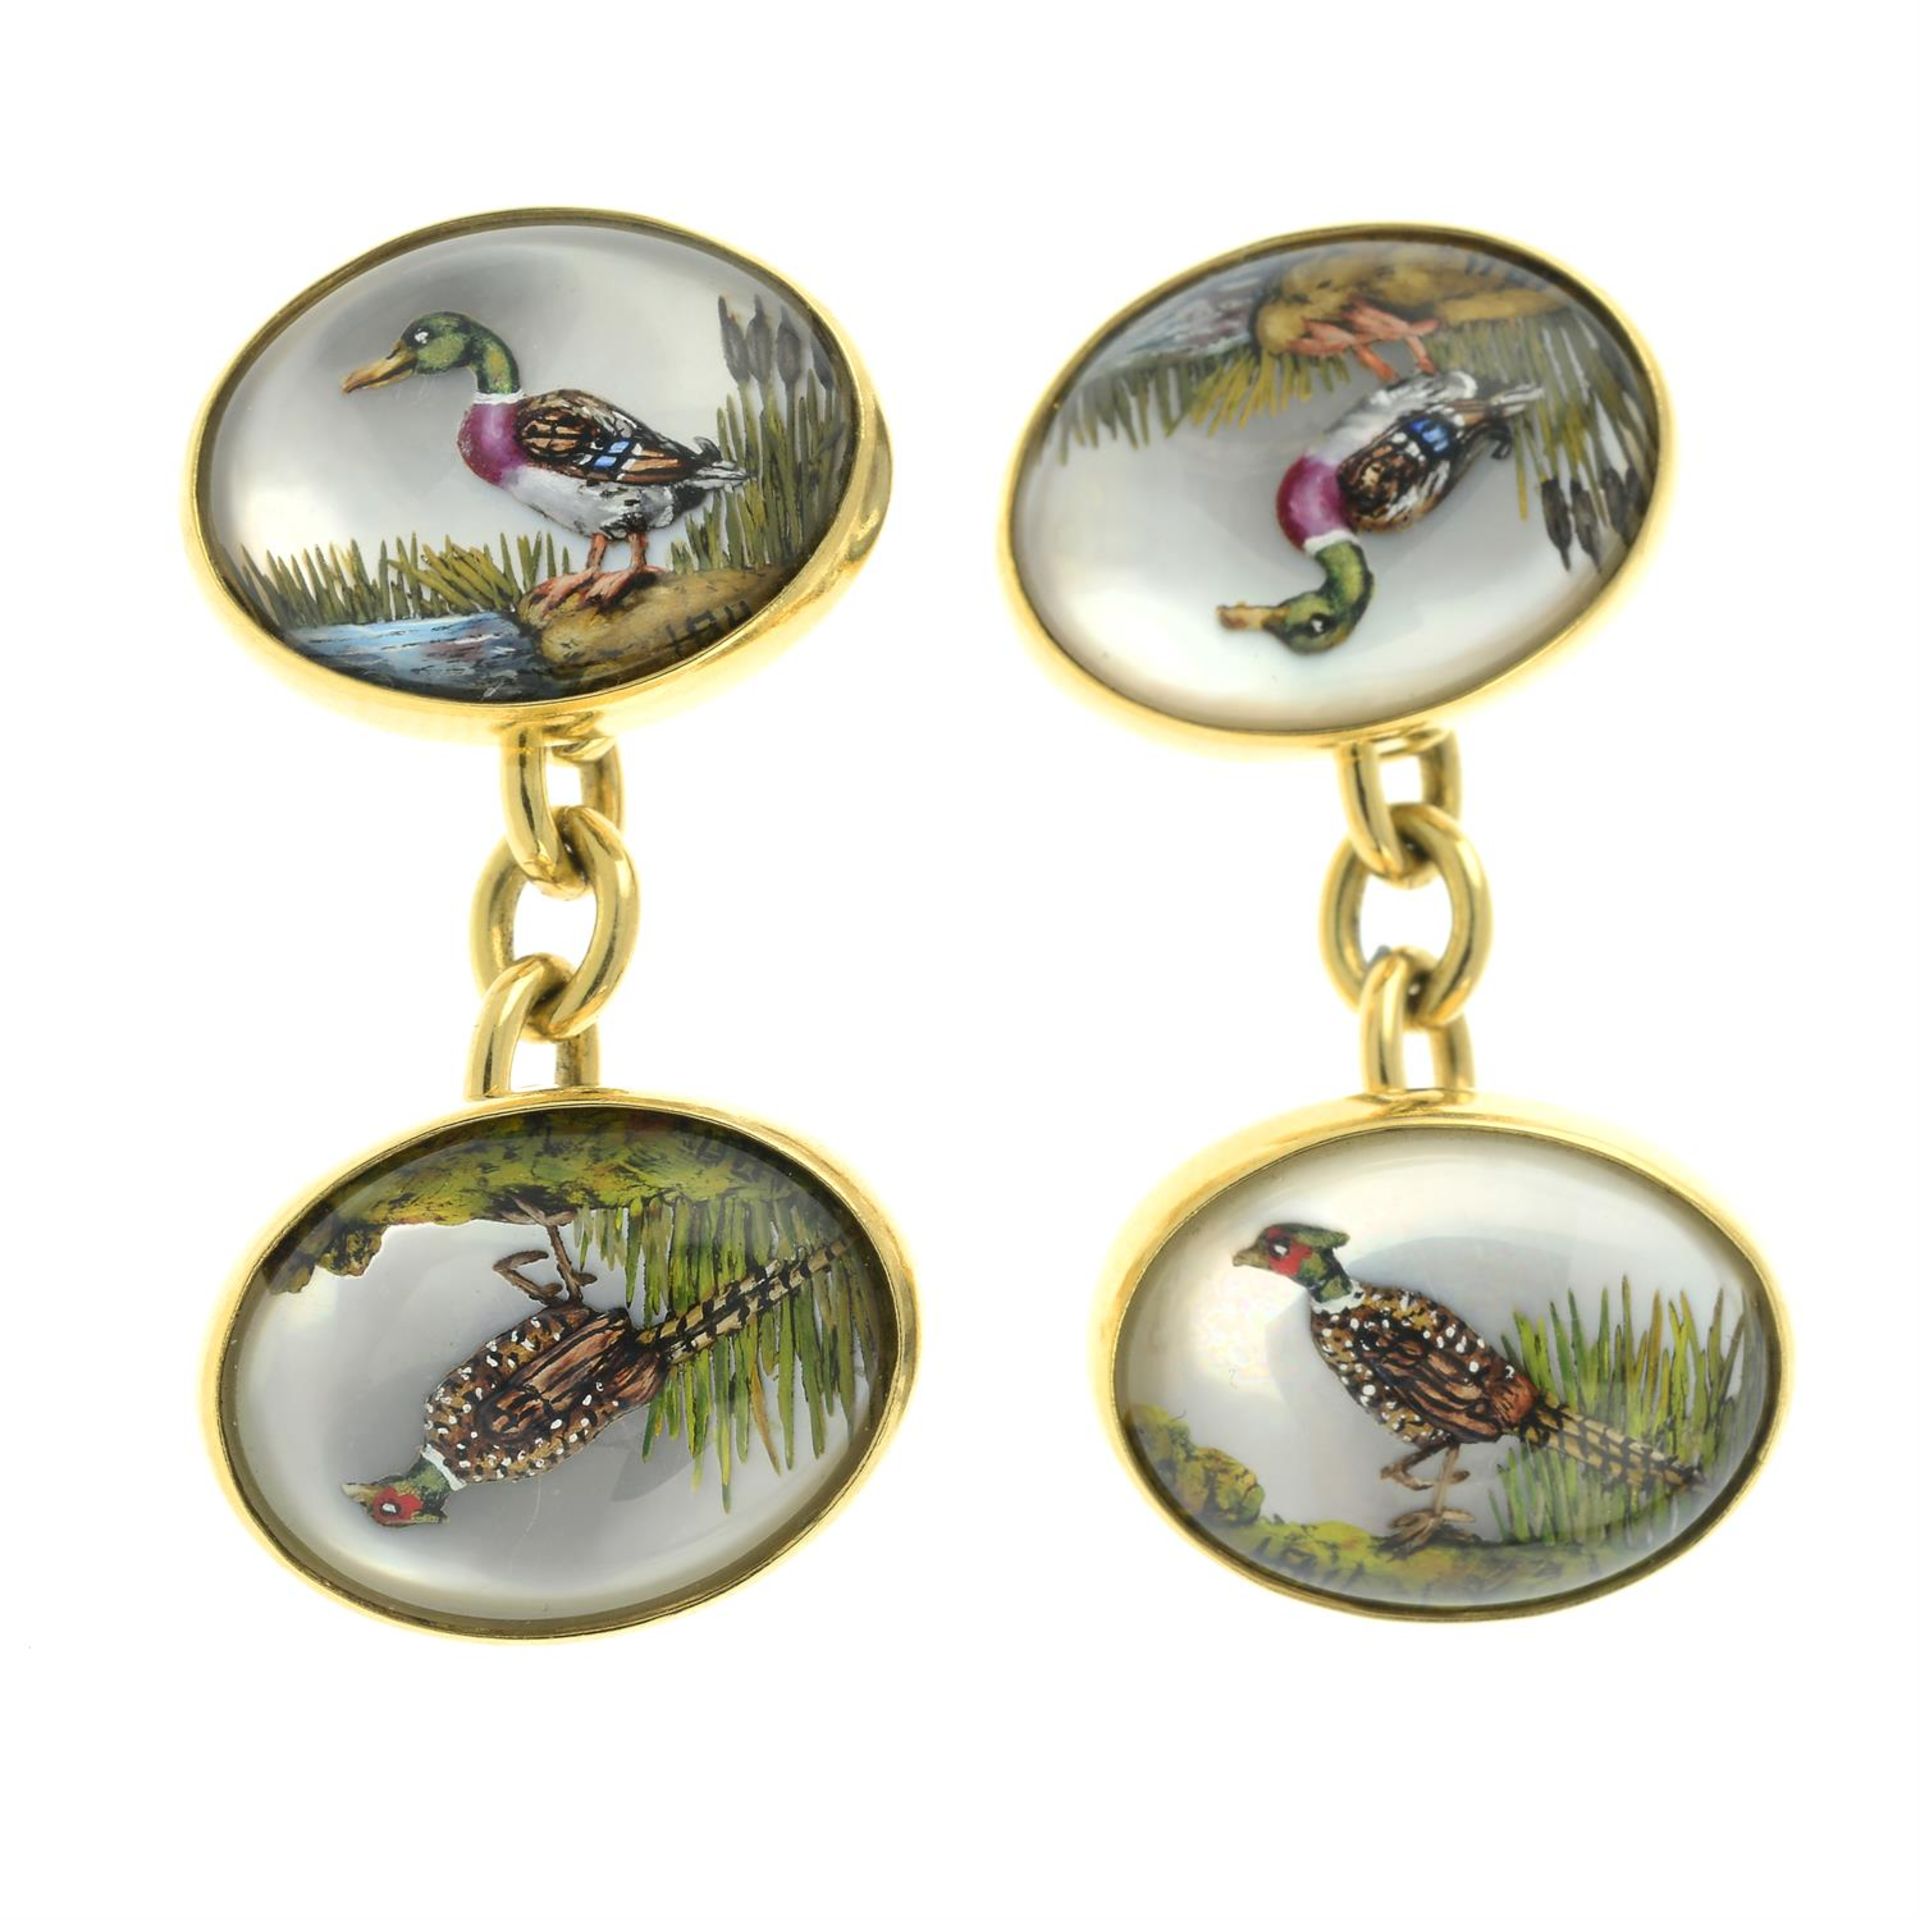 A pair of 18ct gold reverse-carved and painted rock crystal cufflinks, depicting a mallard duck and - Image 2 of 3